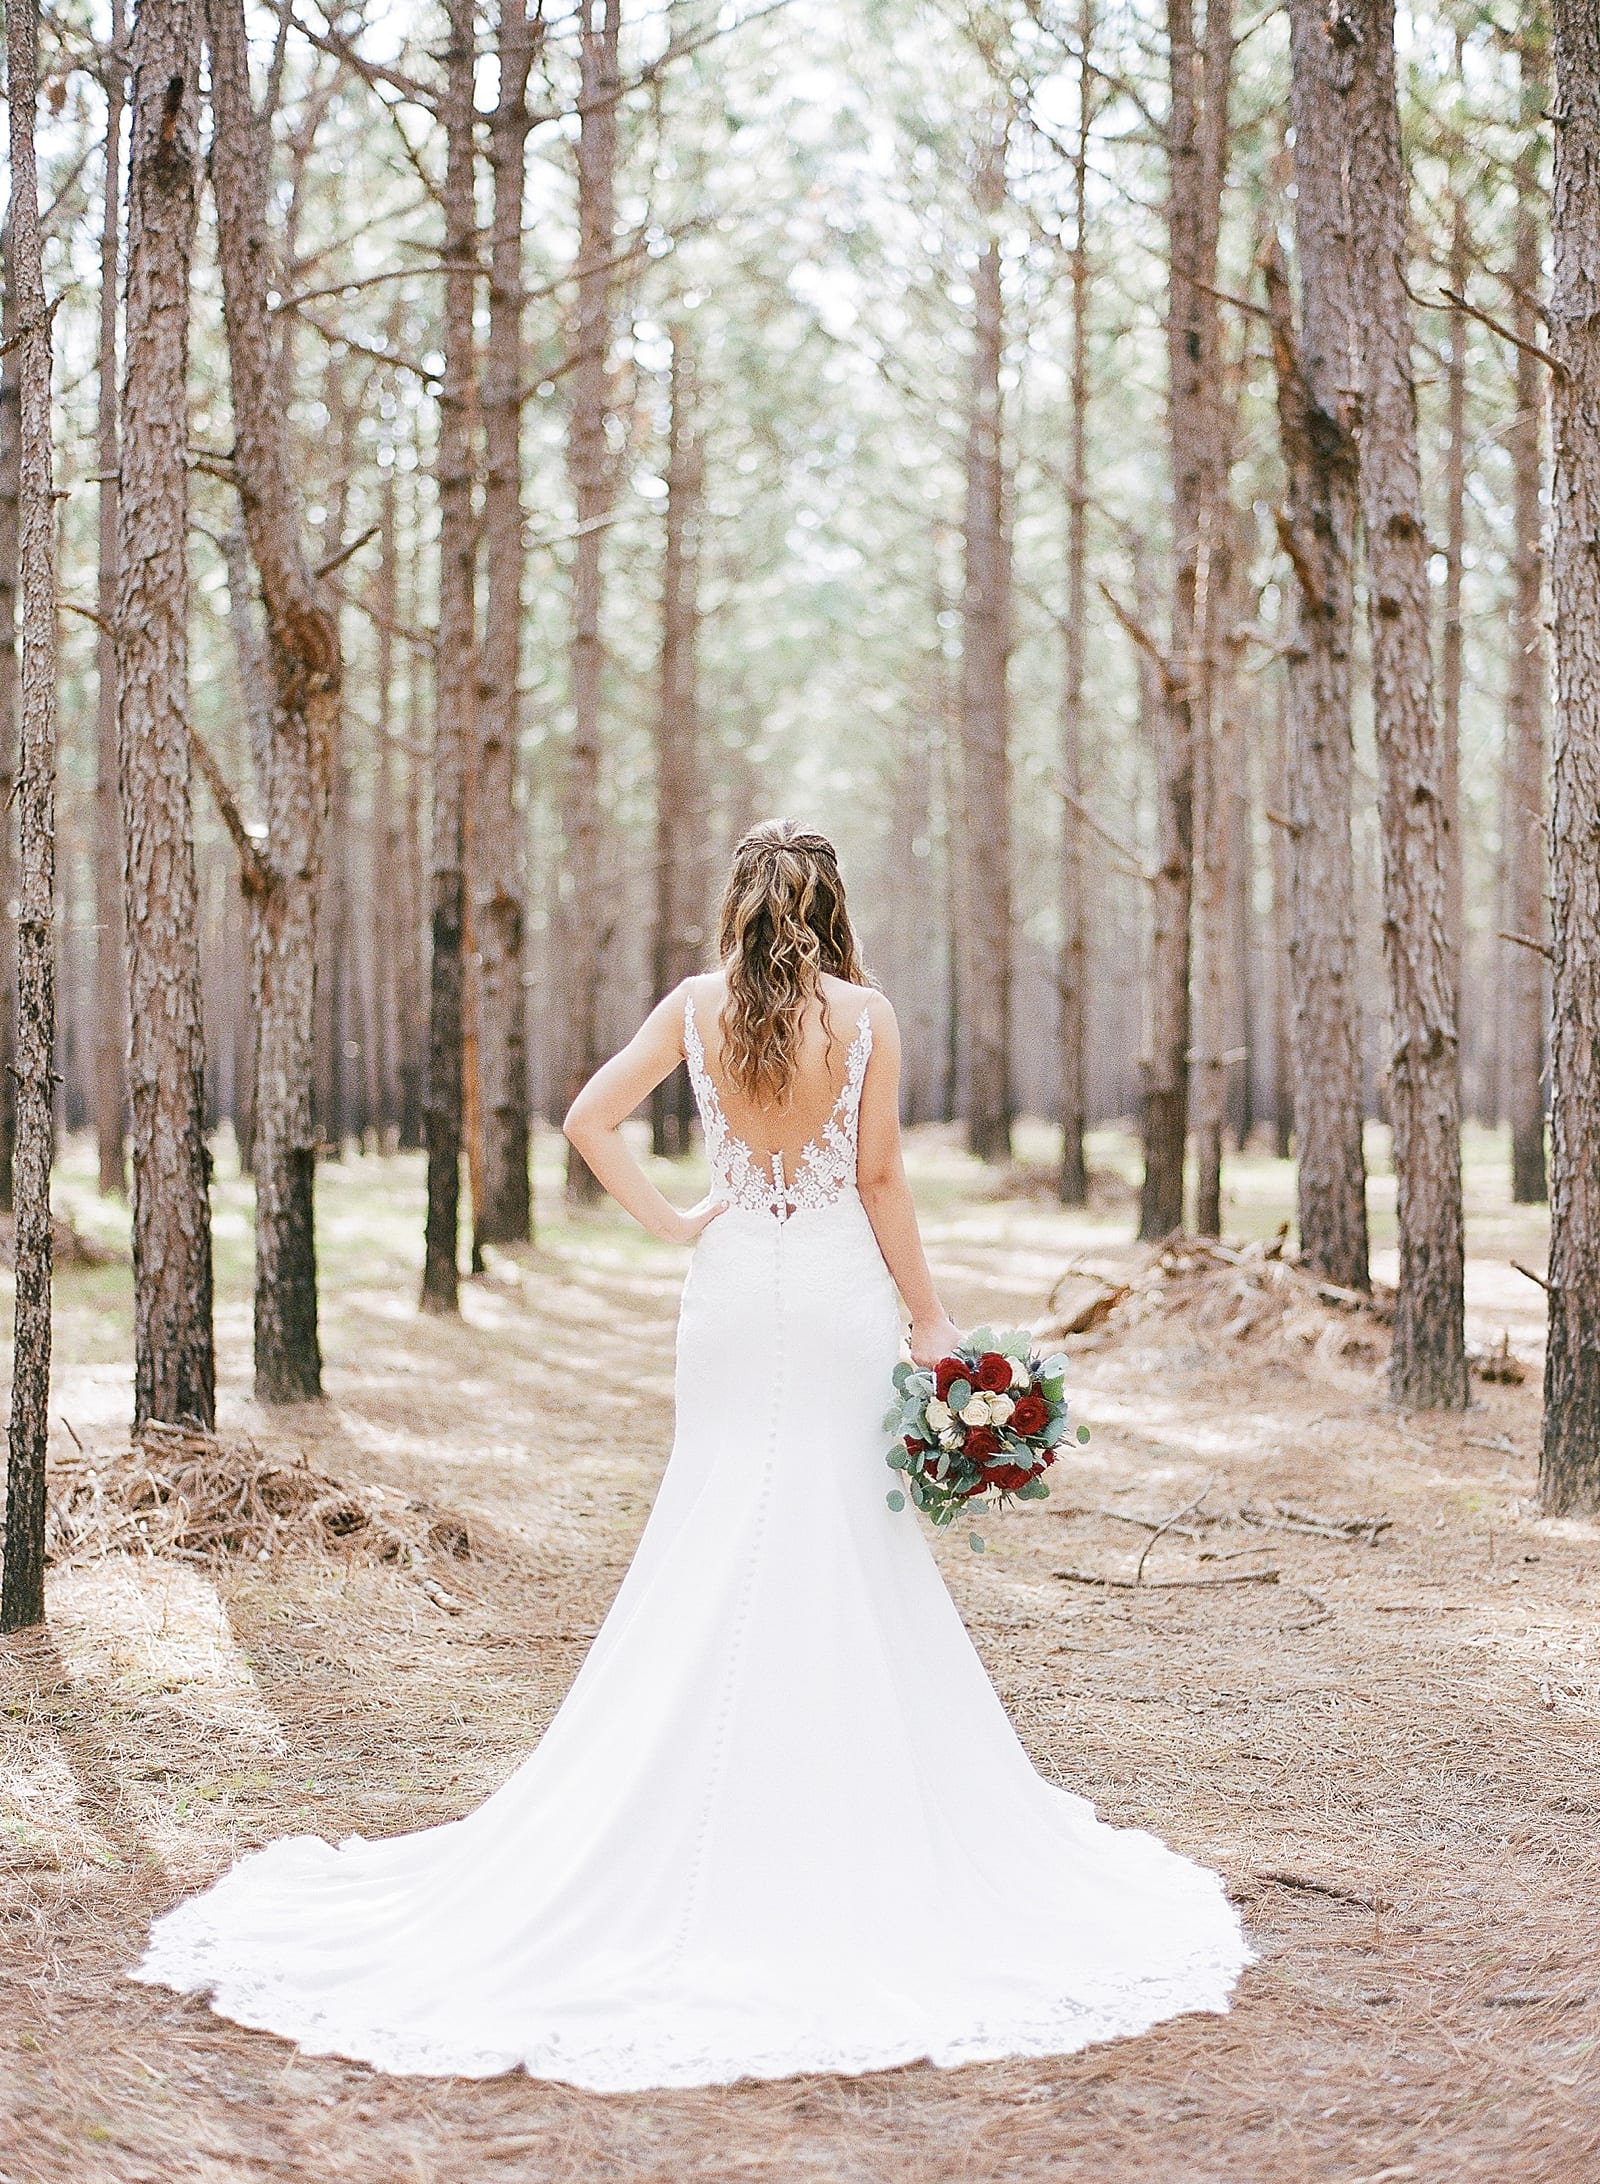 Back of Bride in Pine Trees Photo